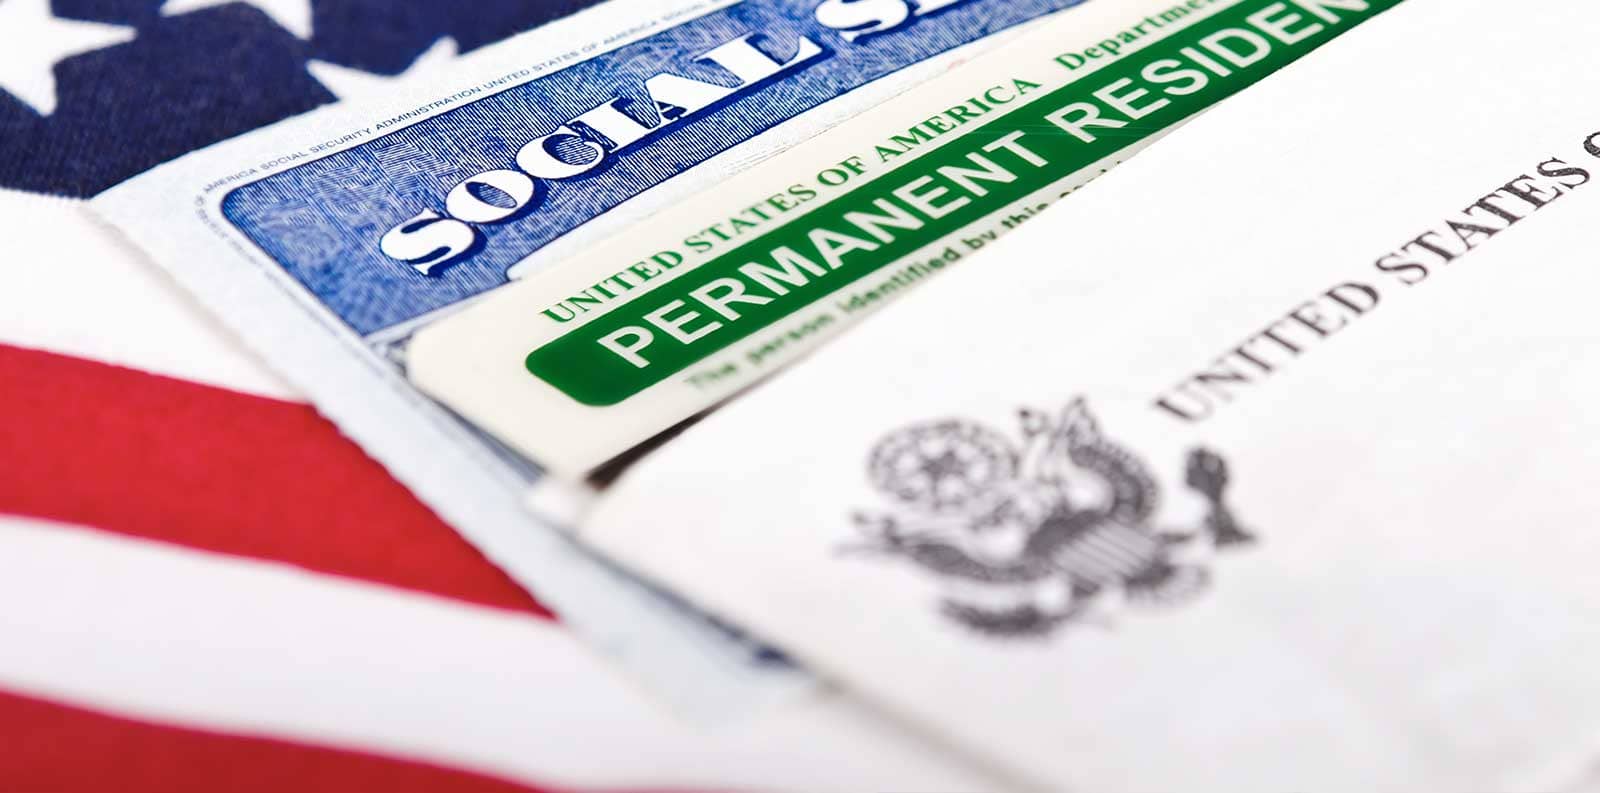 close-up of a green card amongst other personal documents